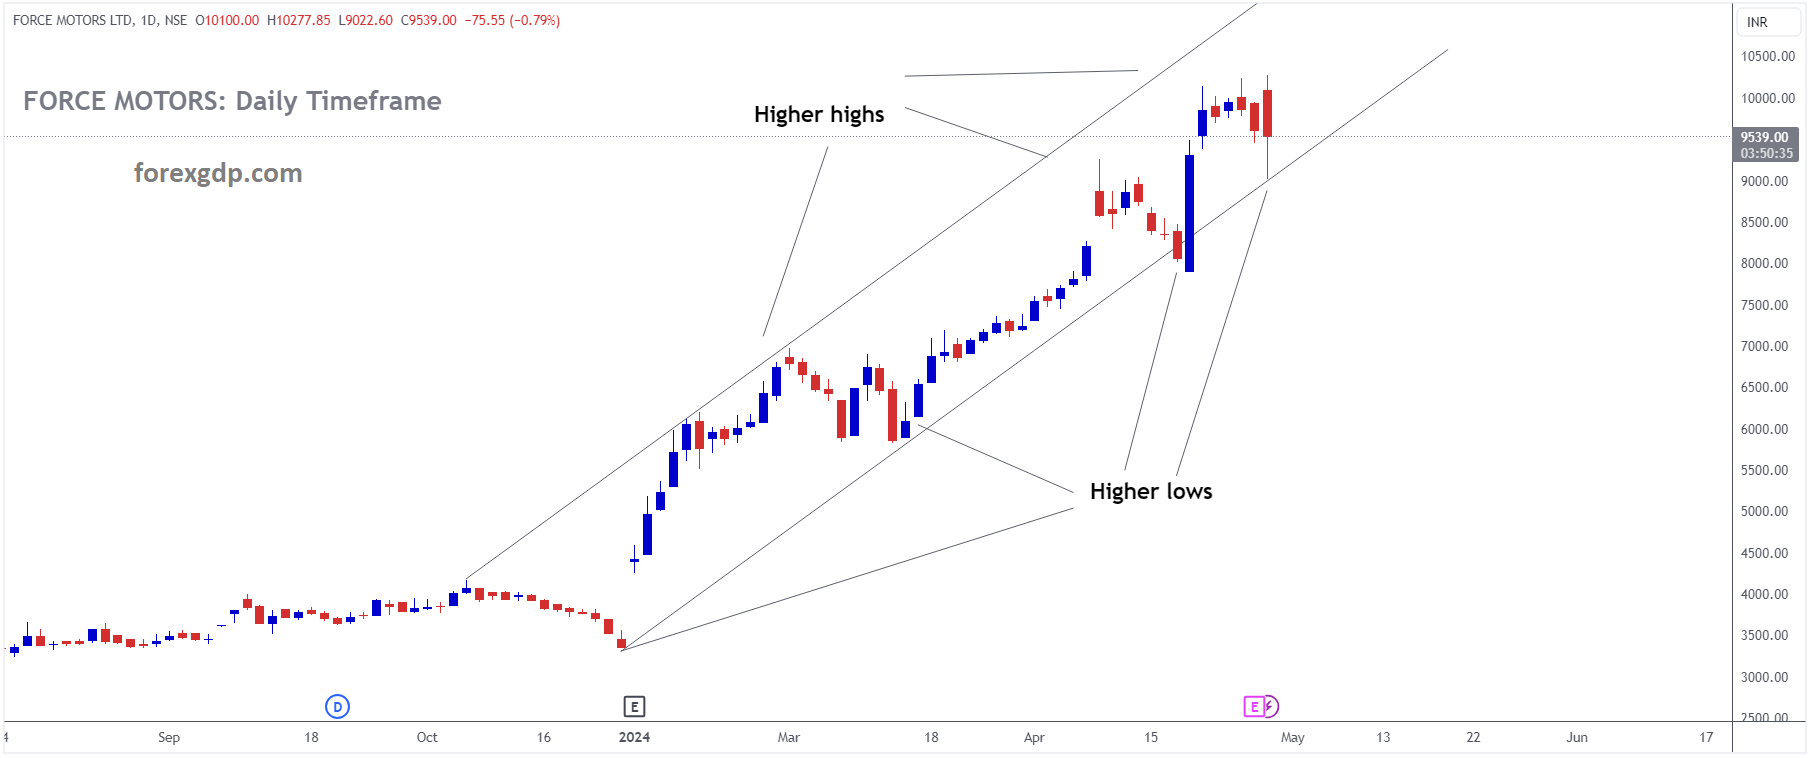 FORCE MOTORS Market Price is moving in Ascending channel and market has reached higher low area of the channel